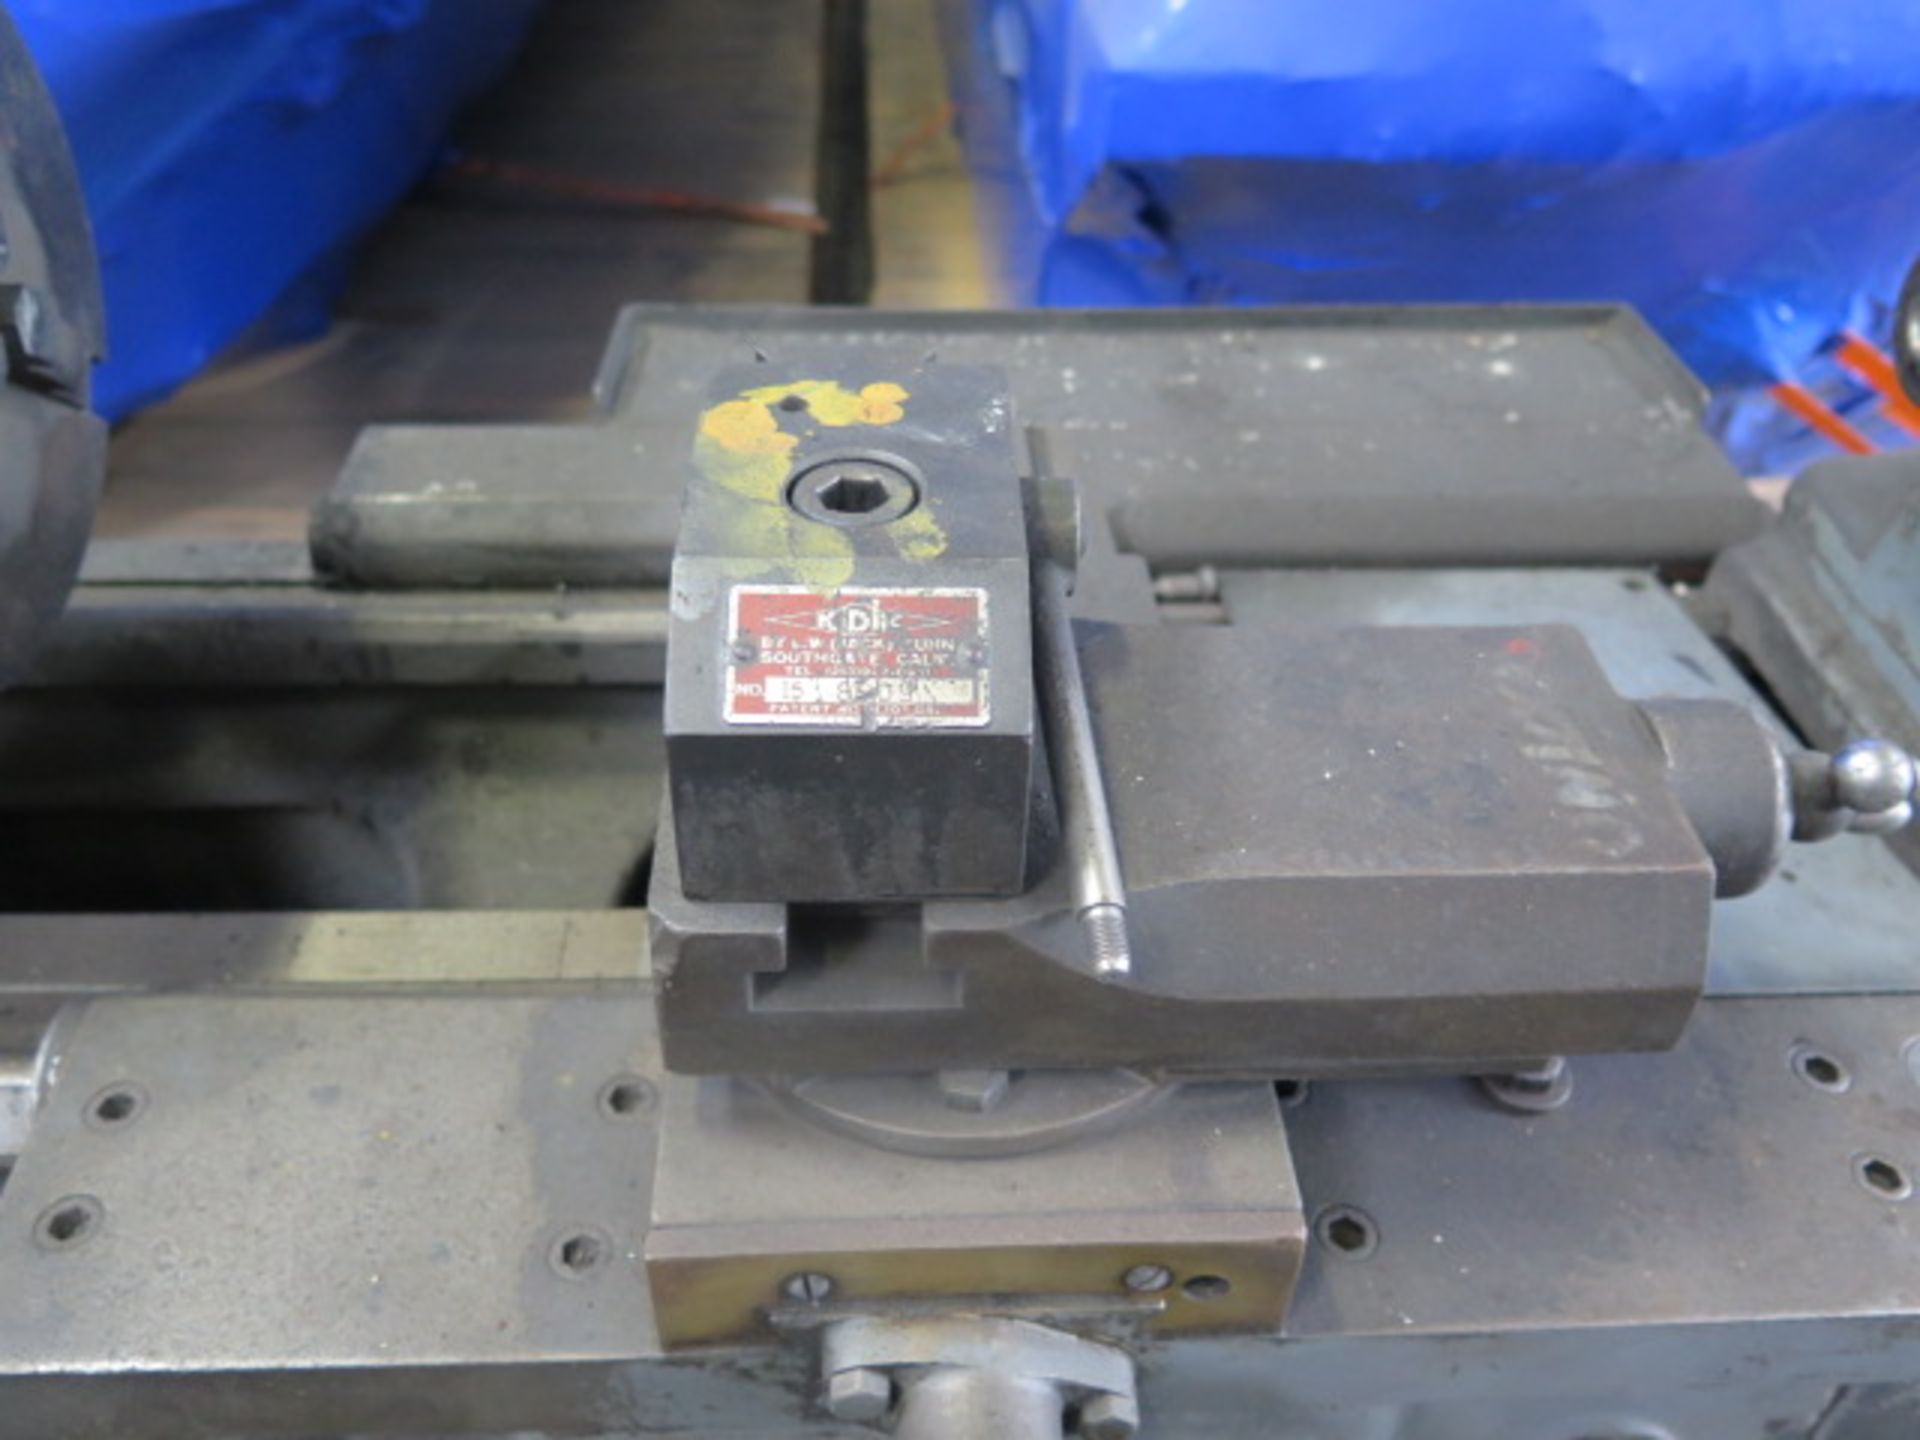 Monarch 10EE Tool Room Lathe s/n 11142 w/ 2500 RPM, Inch Threading, KDK Tool Post, SOLD AS IS - Image 8 of 12